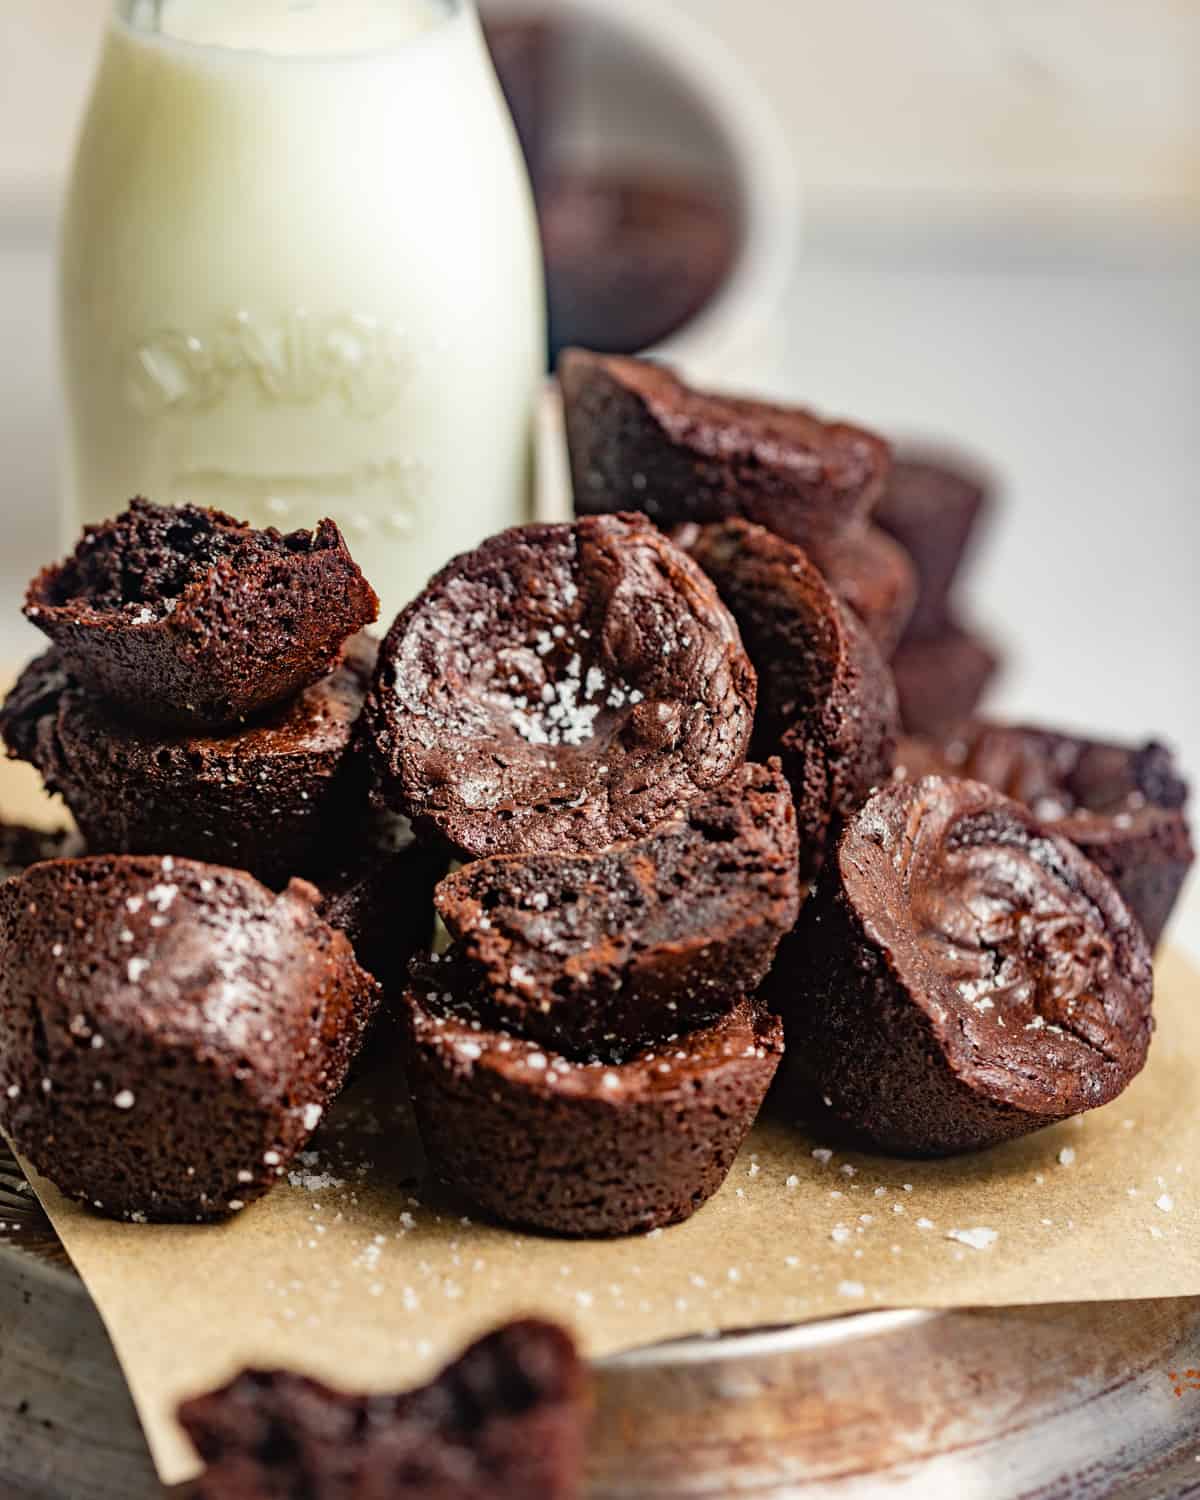 Mini brownie bites sprinkled with salt piled on a square of parchment paper in front of a jar of milk.